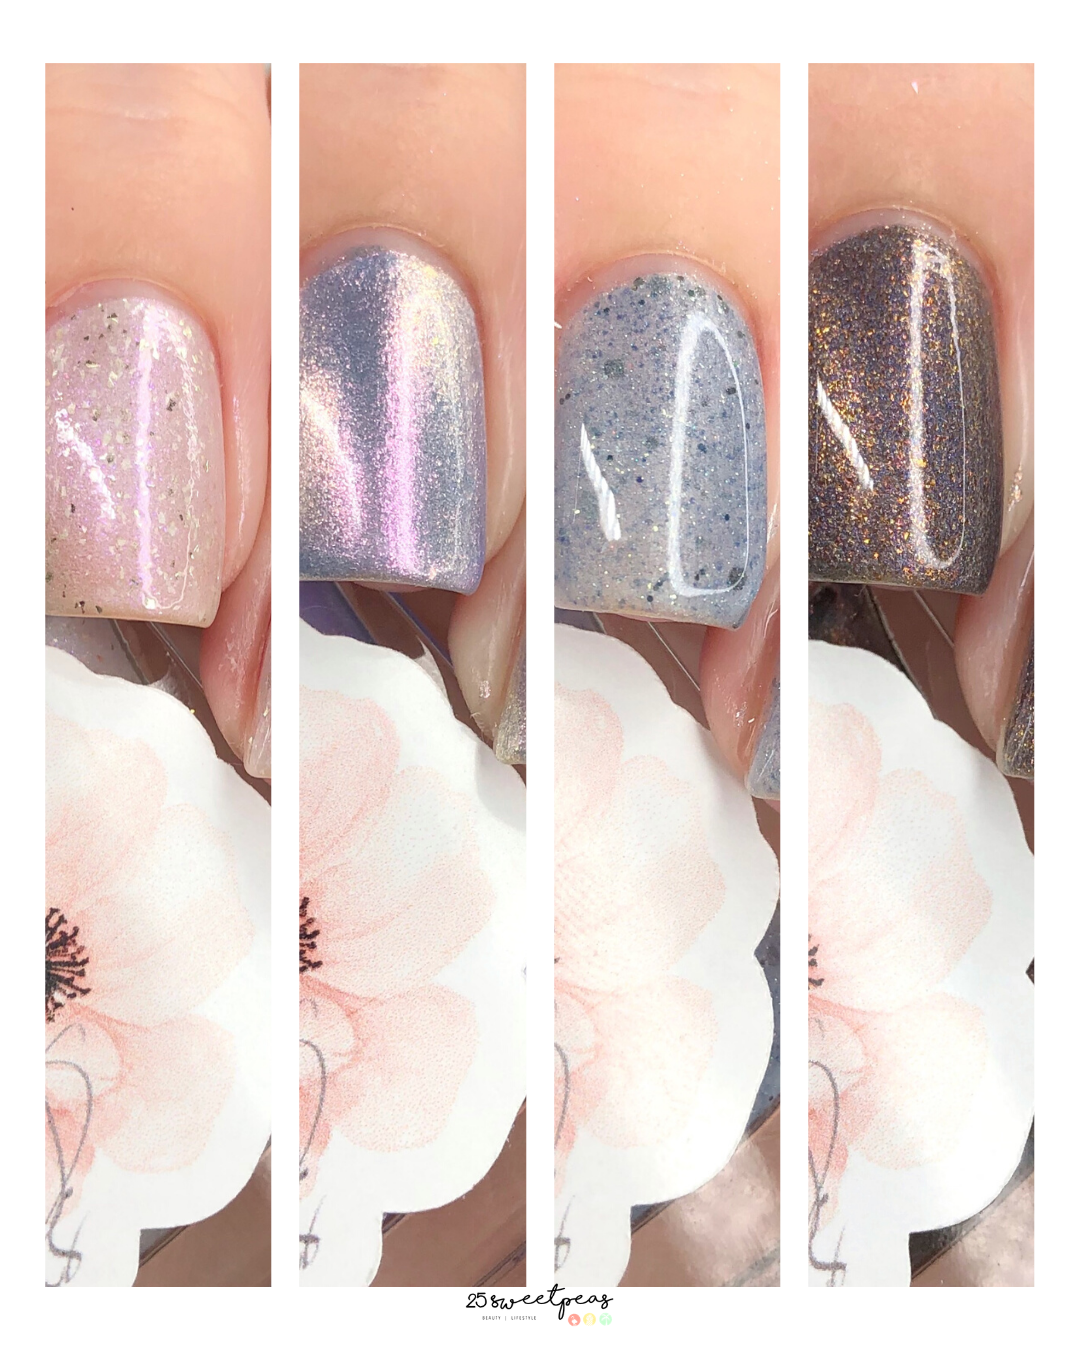 My Stunning Nail Winter Delights Collection 2020 — 25 Sweetpeas